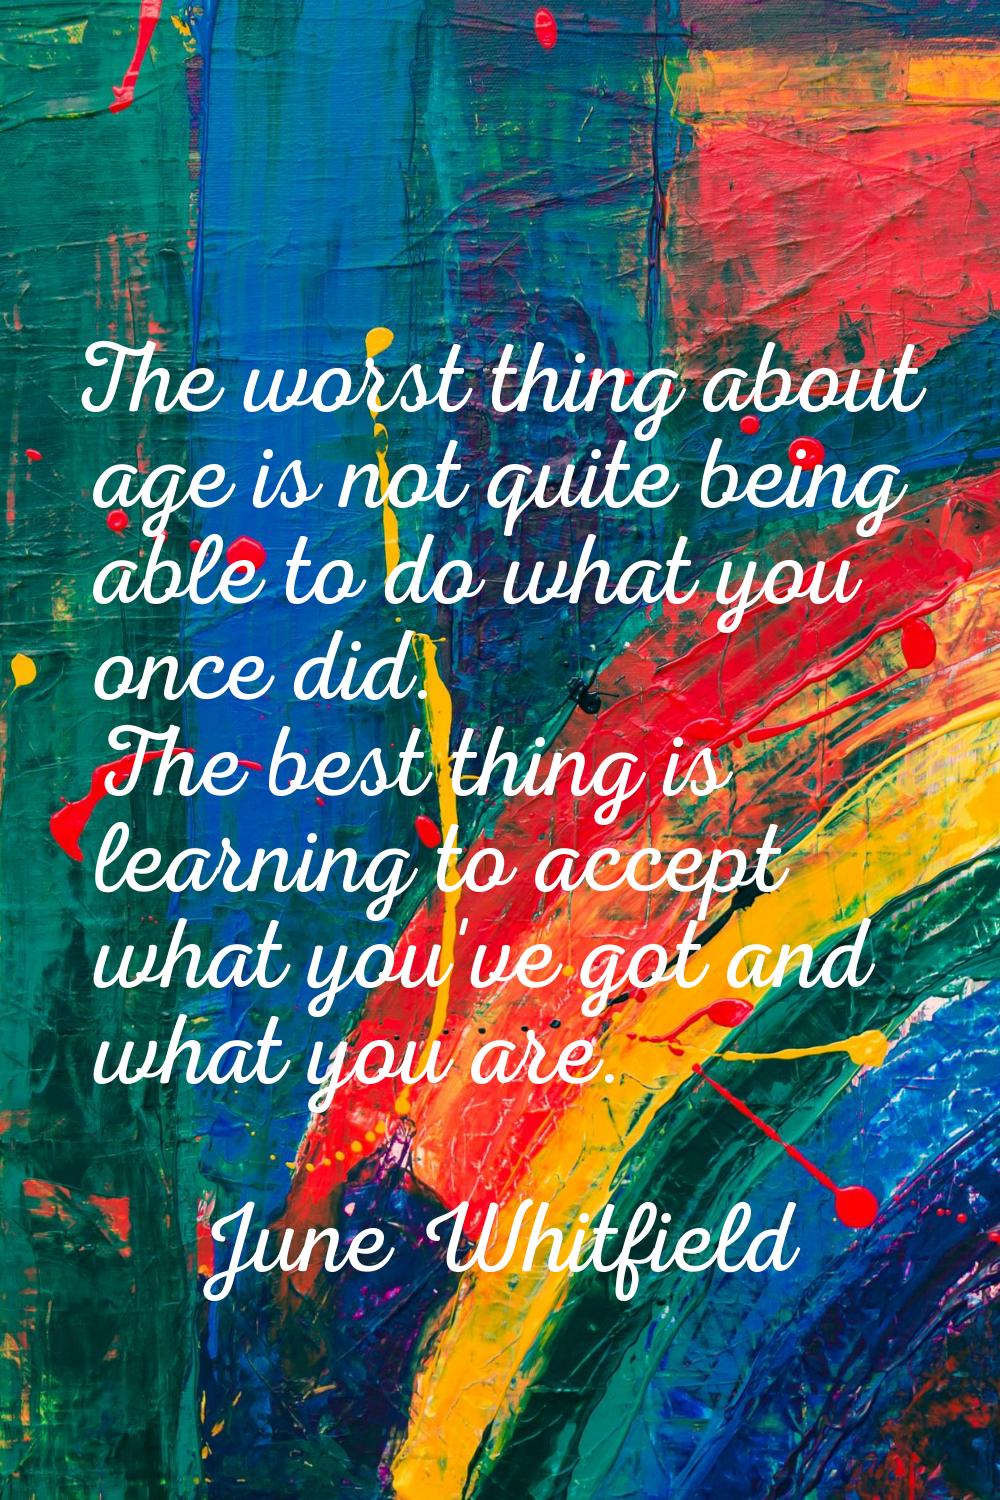 The worst thing about age is not quite being able to do what you once did. The best thing is learni